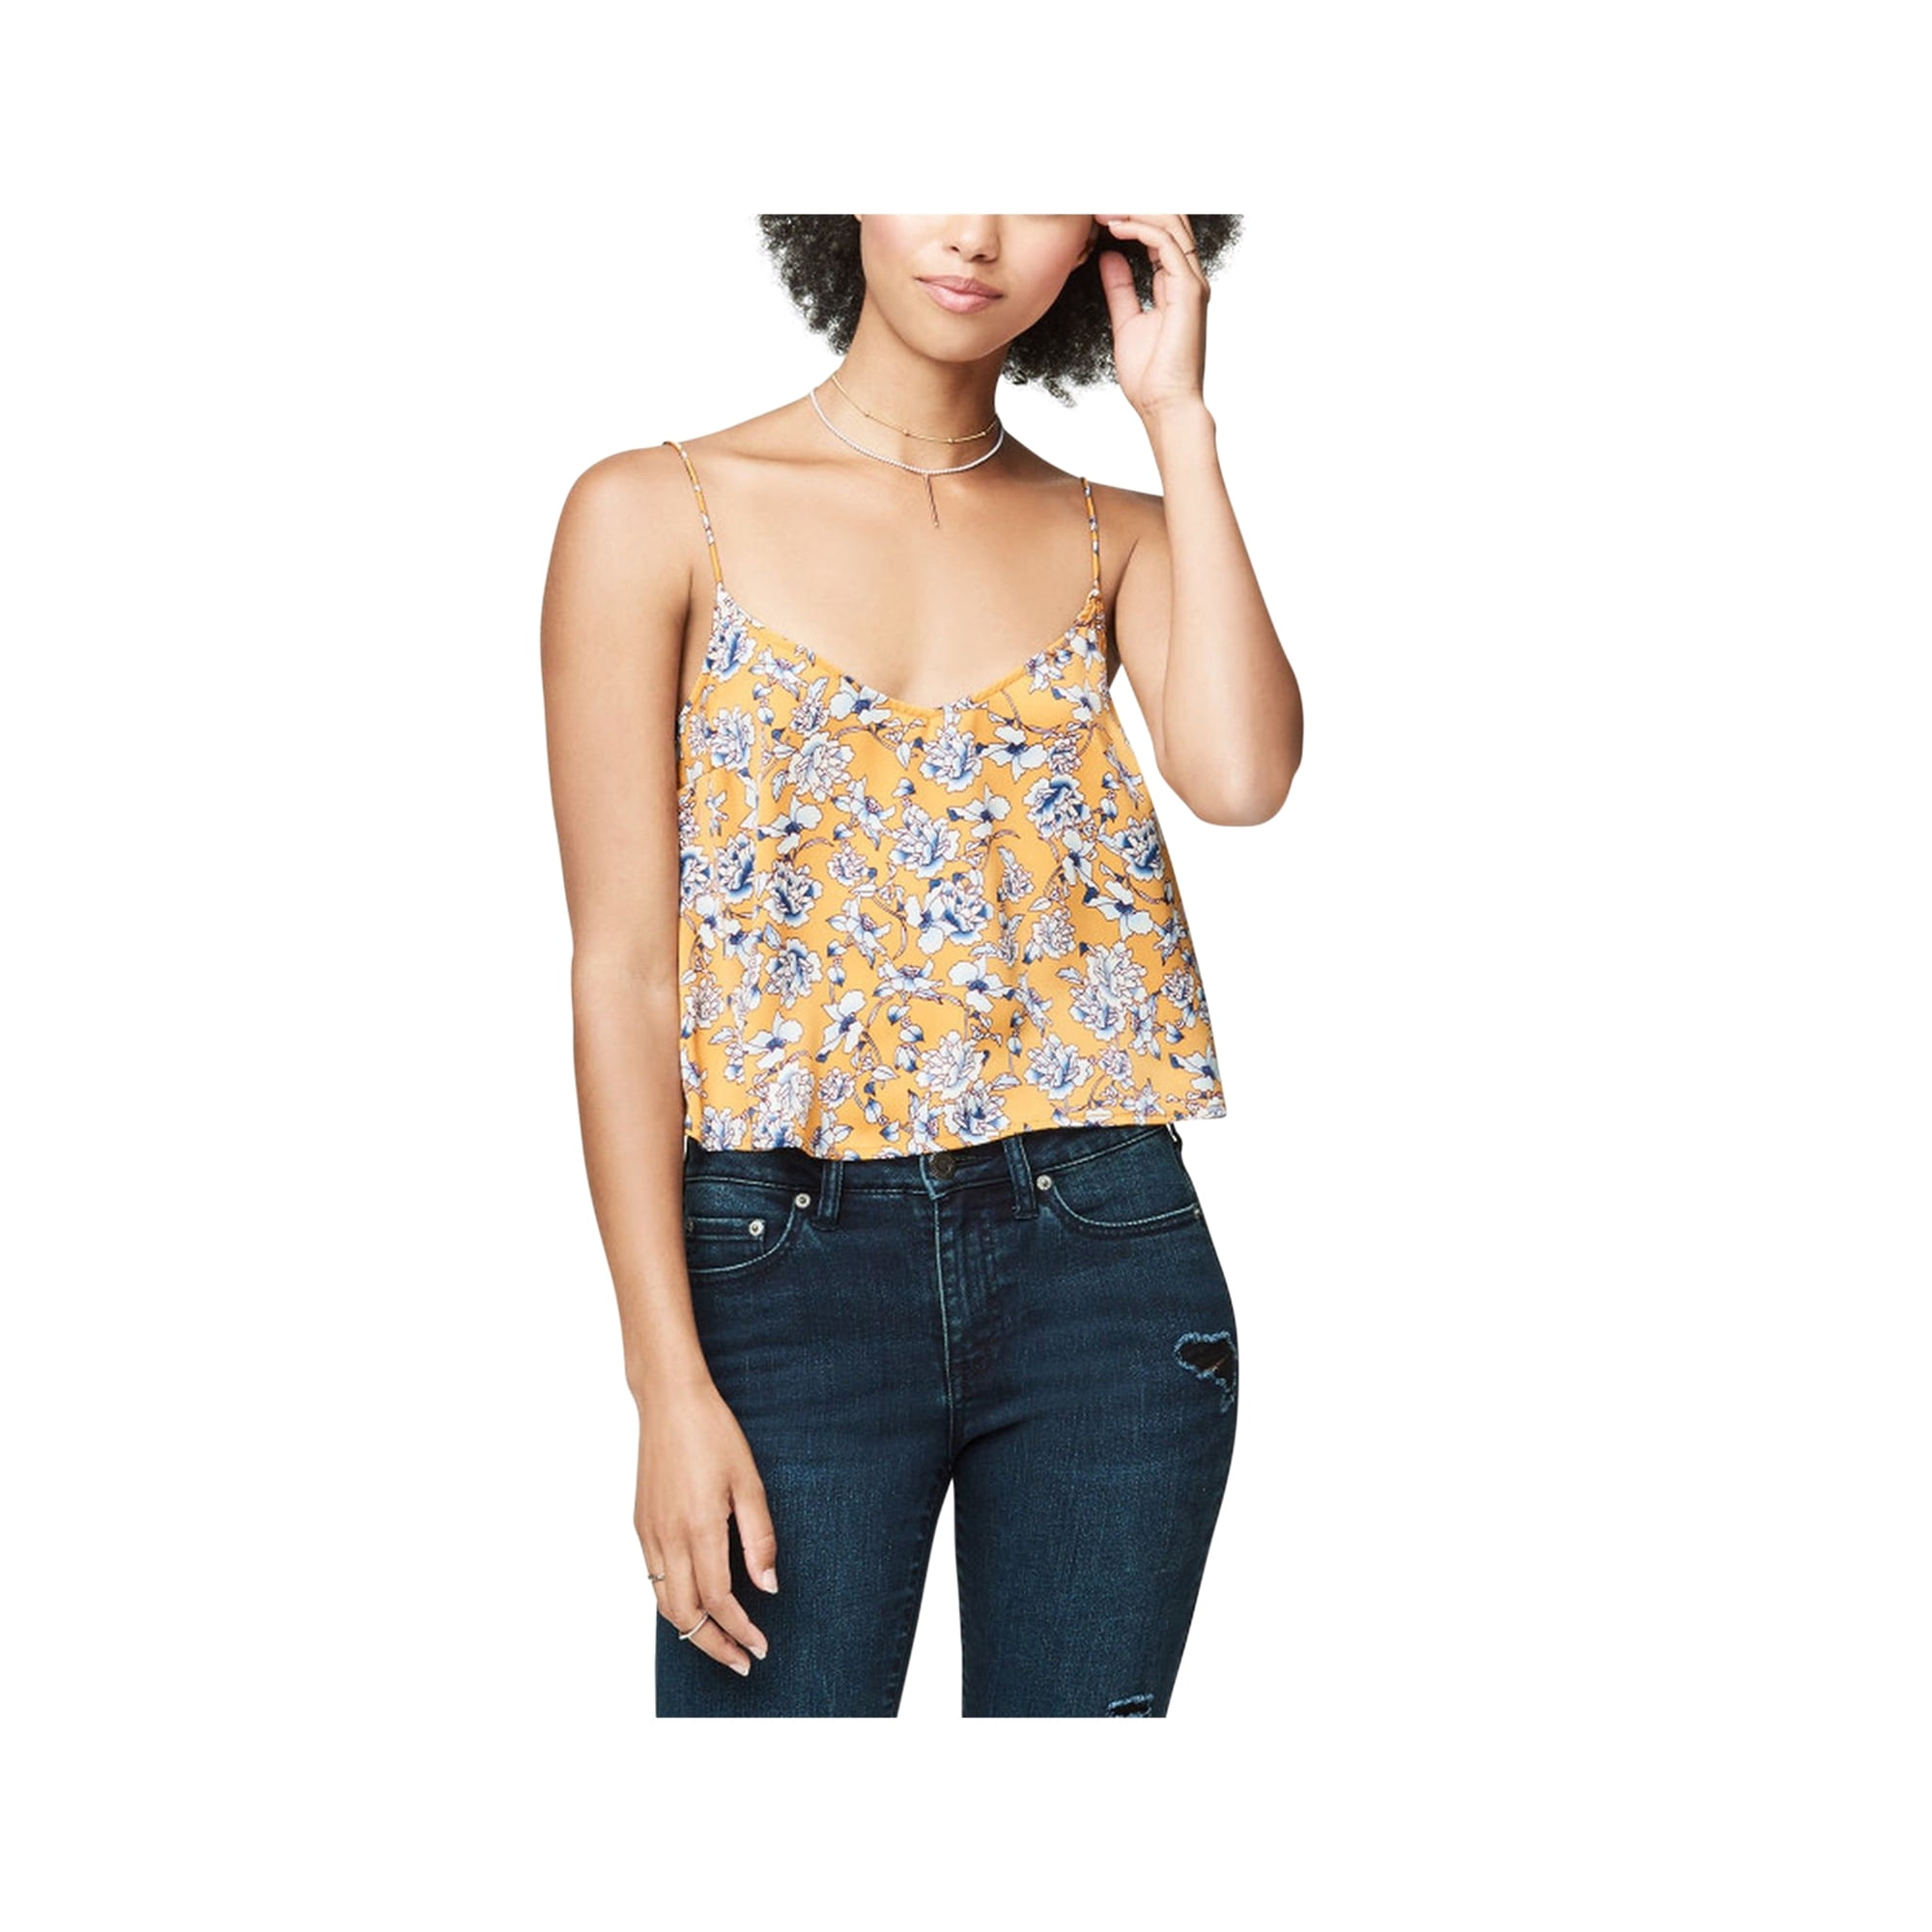 Aeropostale Womens Floral Cami Tank Top, Yellow, Large 